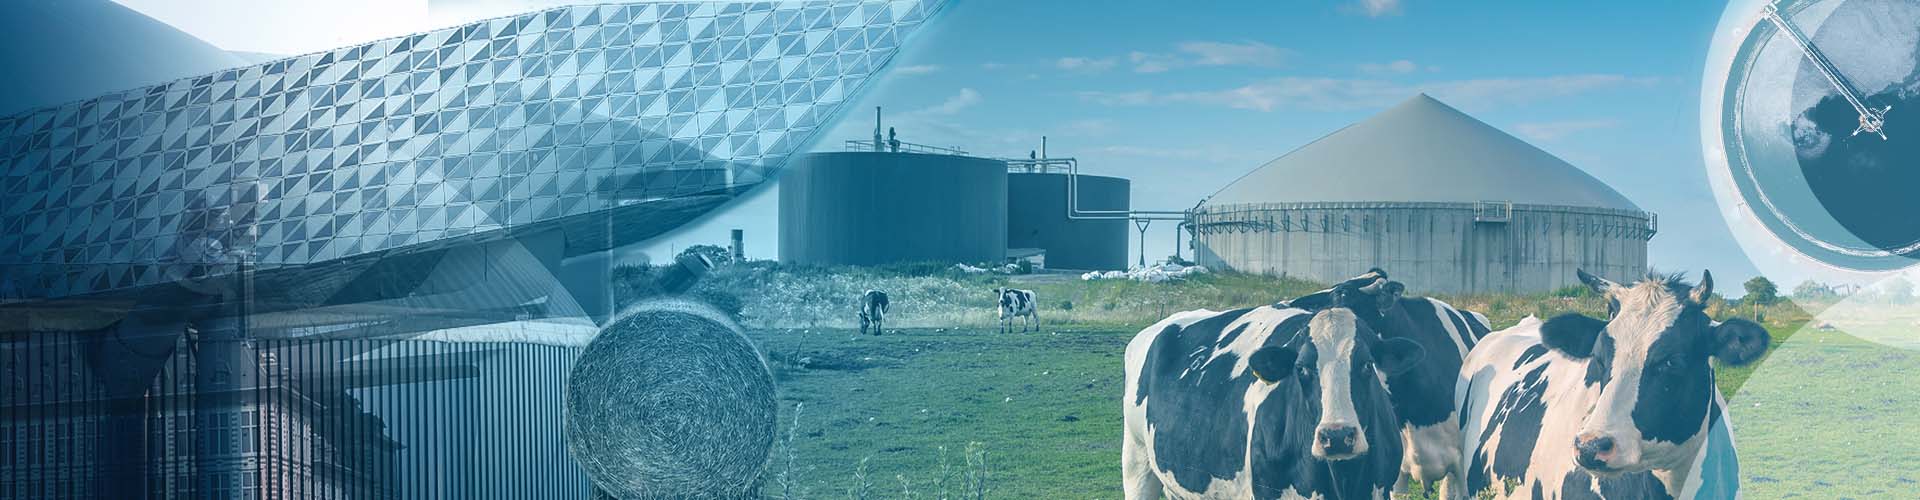 Collage of the Antwerp Port House, cows in paddock at a biofuel plant and a water treatment tank.